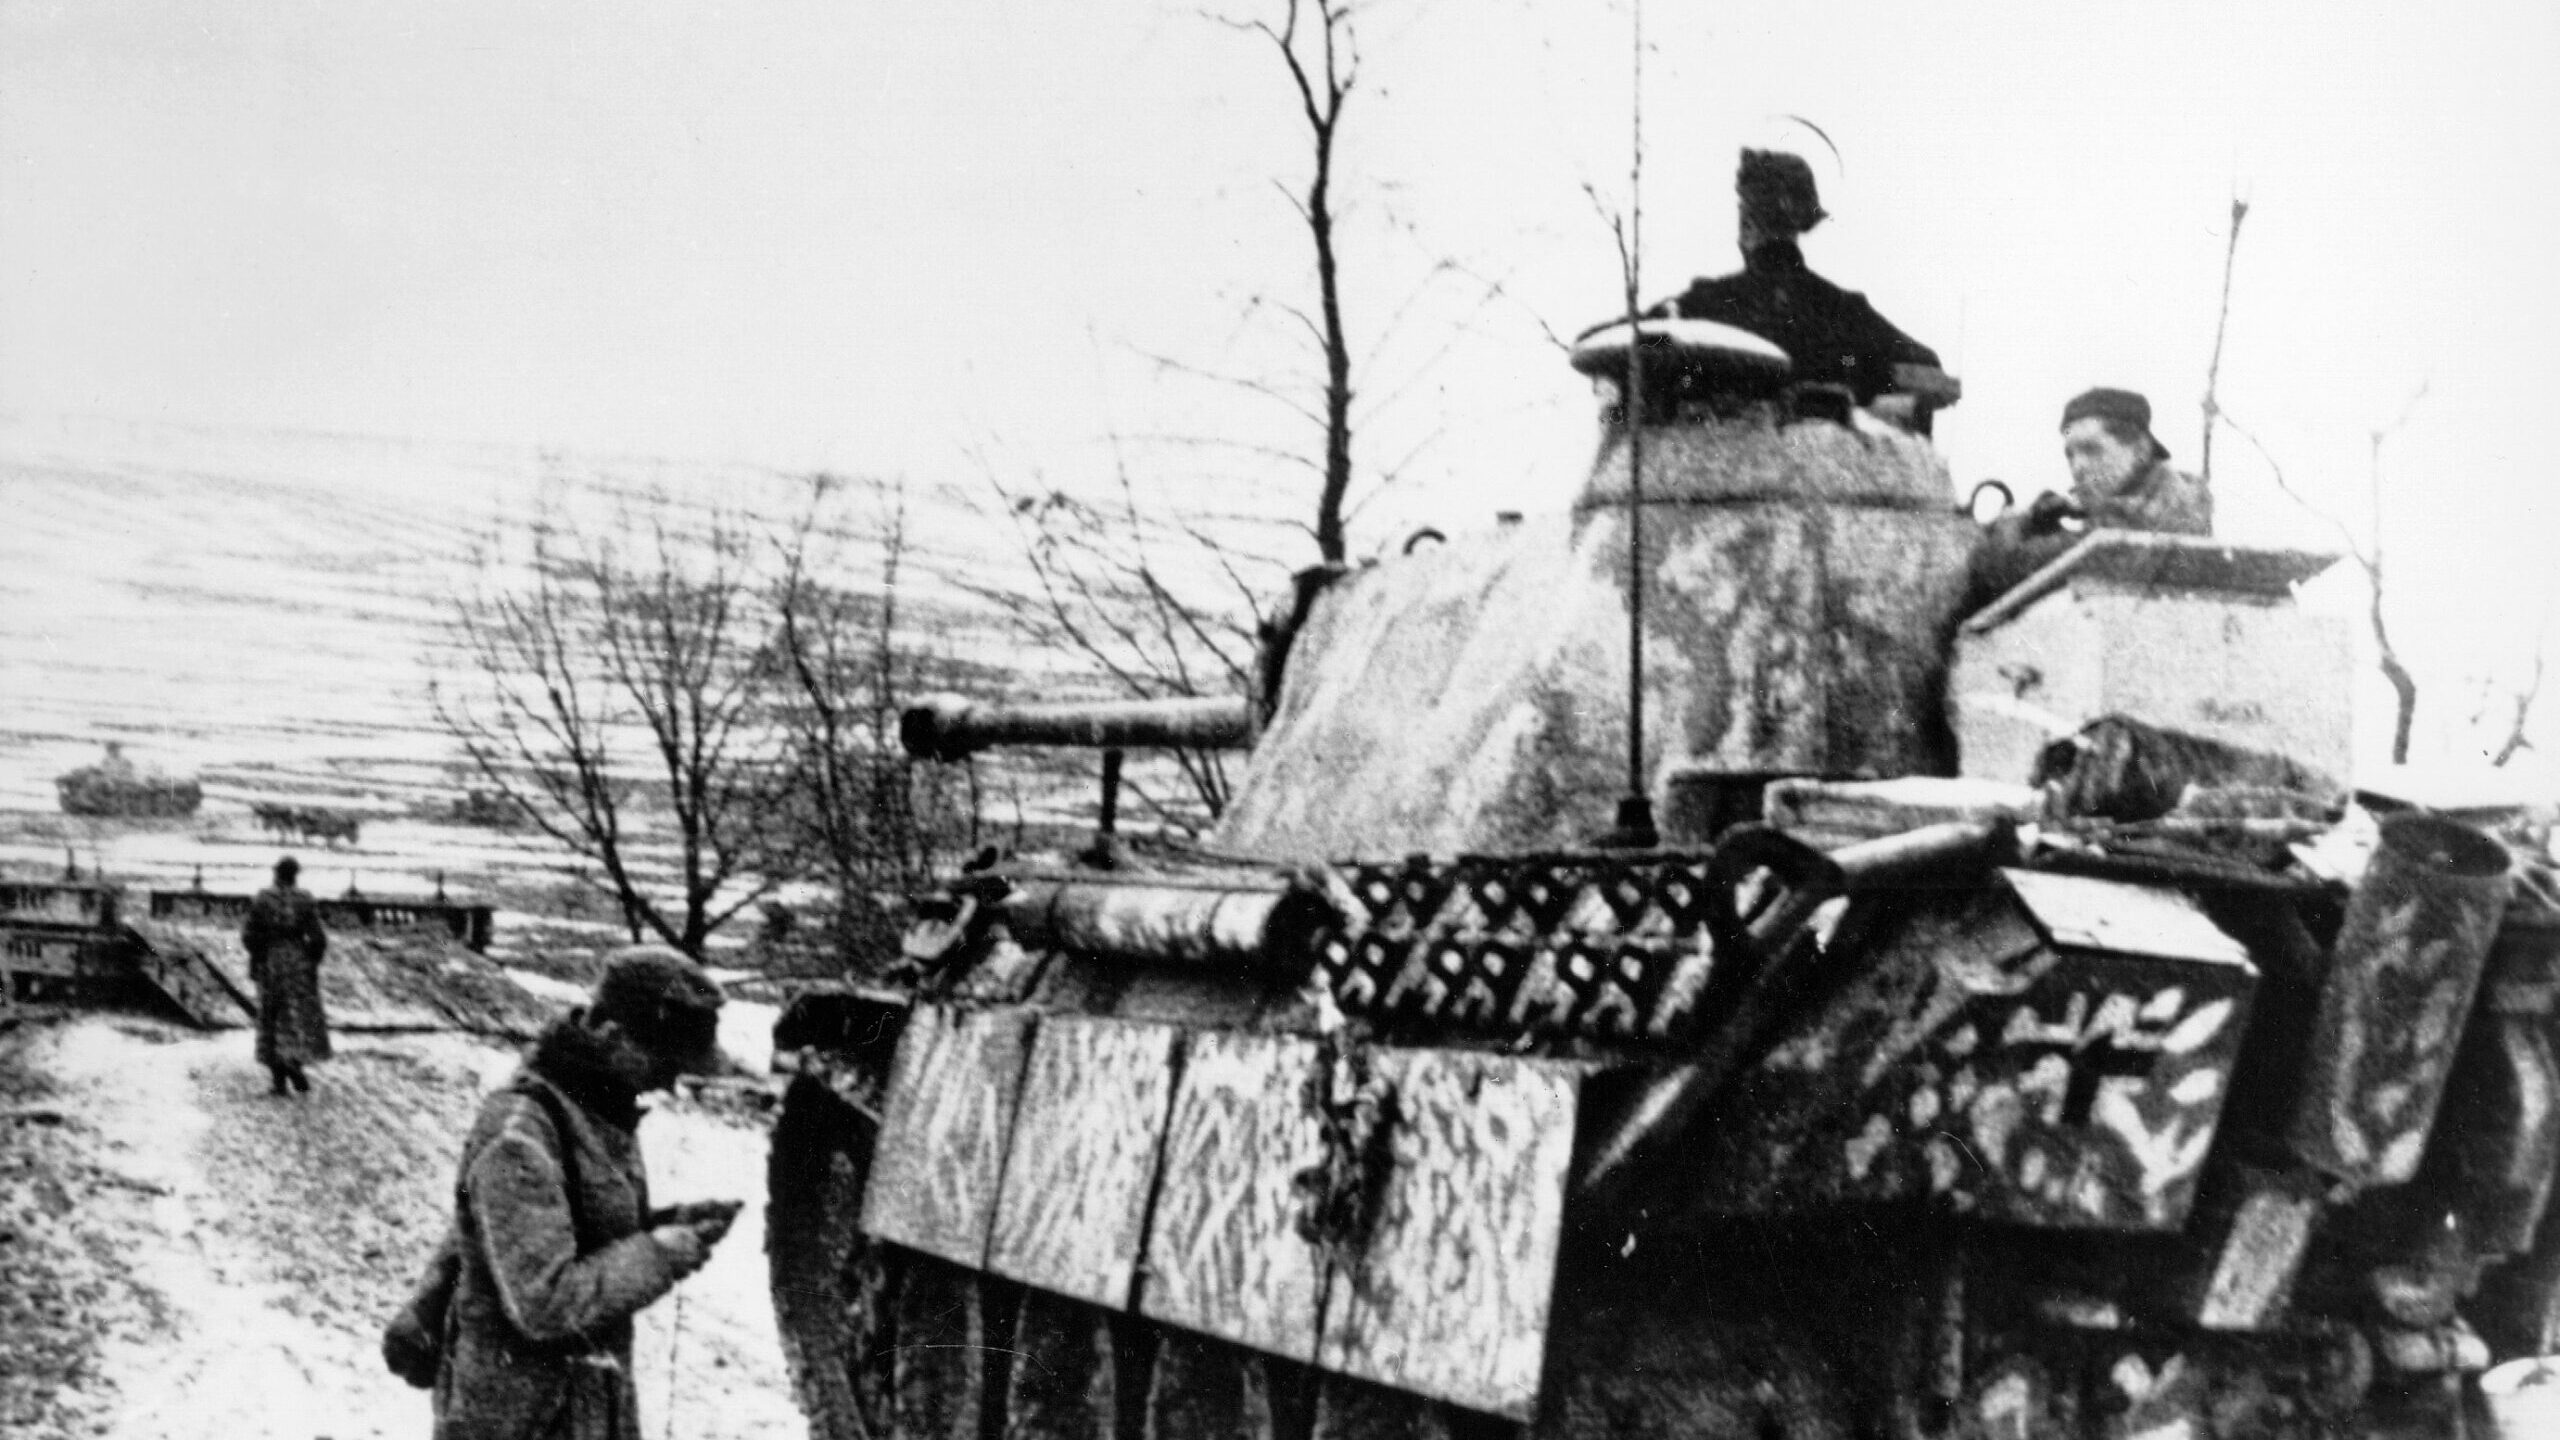 A Panther tank of the 1st SS Panzer Division “Leibstandarte” moves forward warily during the Battle of the Bulge as its commander scans the horizon for signs of enemy forces.